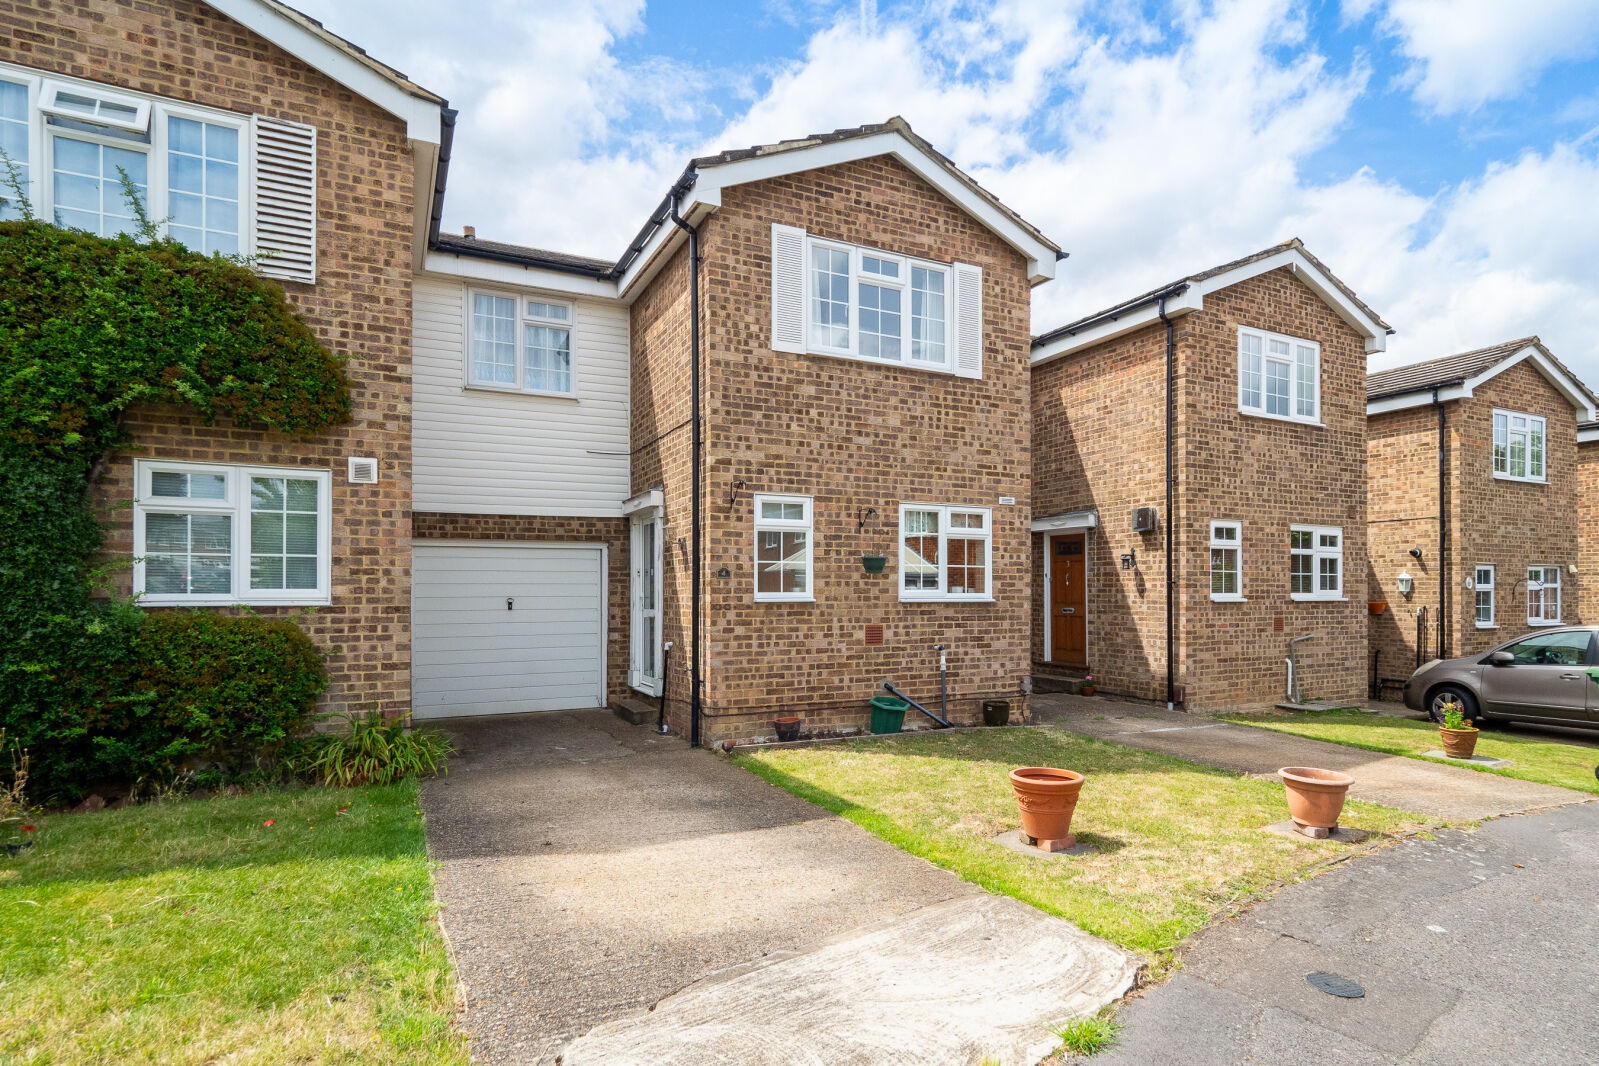 4 bedroom mid terraced house for sale Penshurst Way, Sutton, SM2, main image